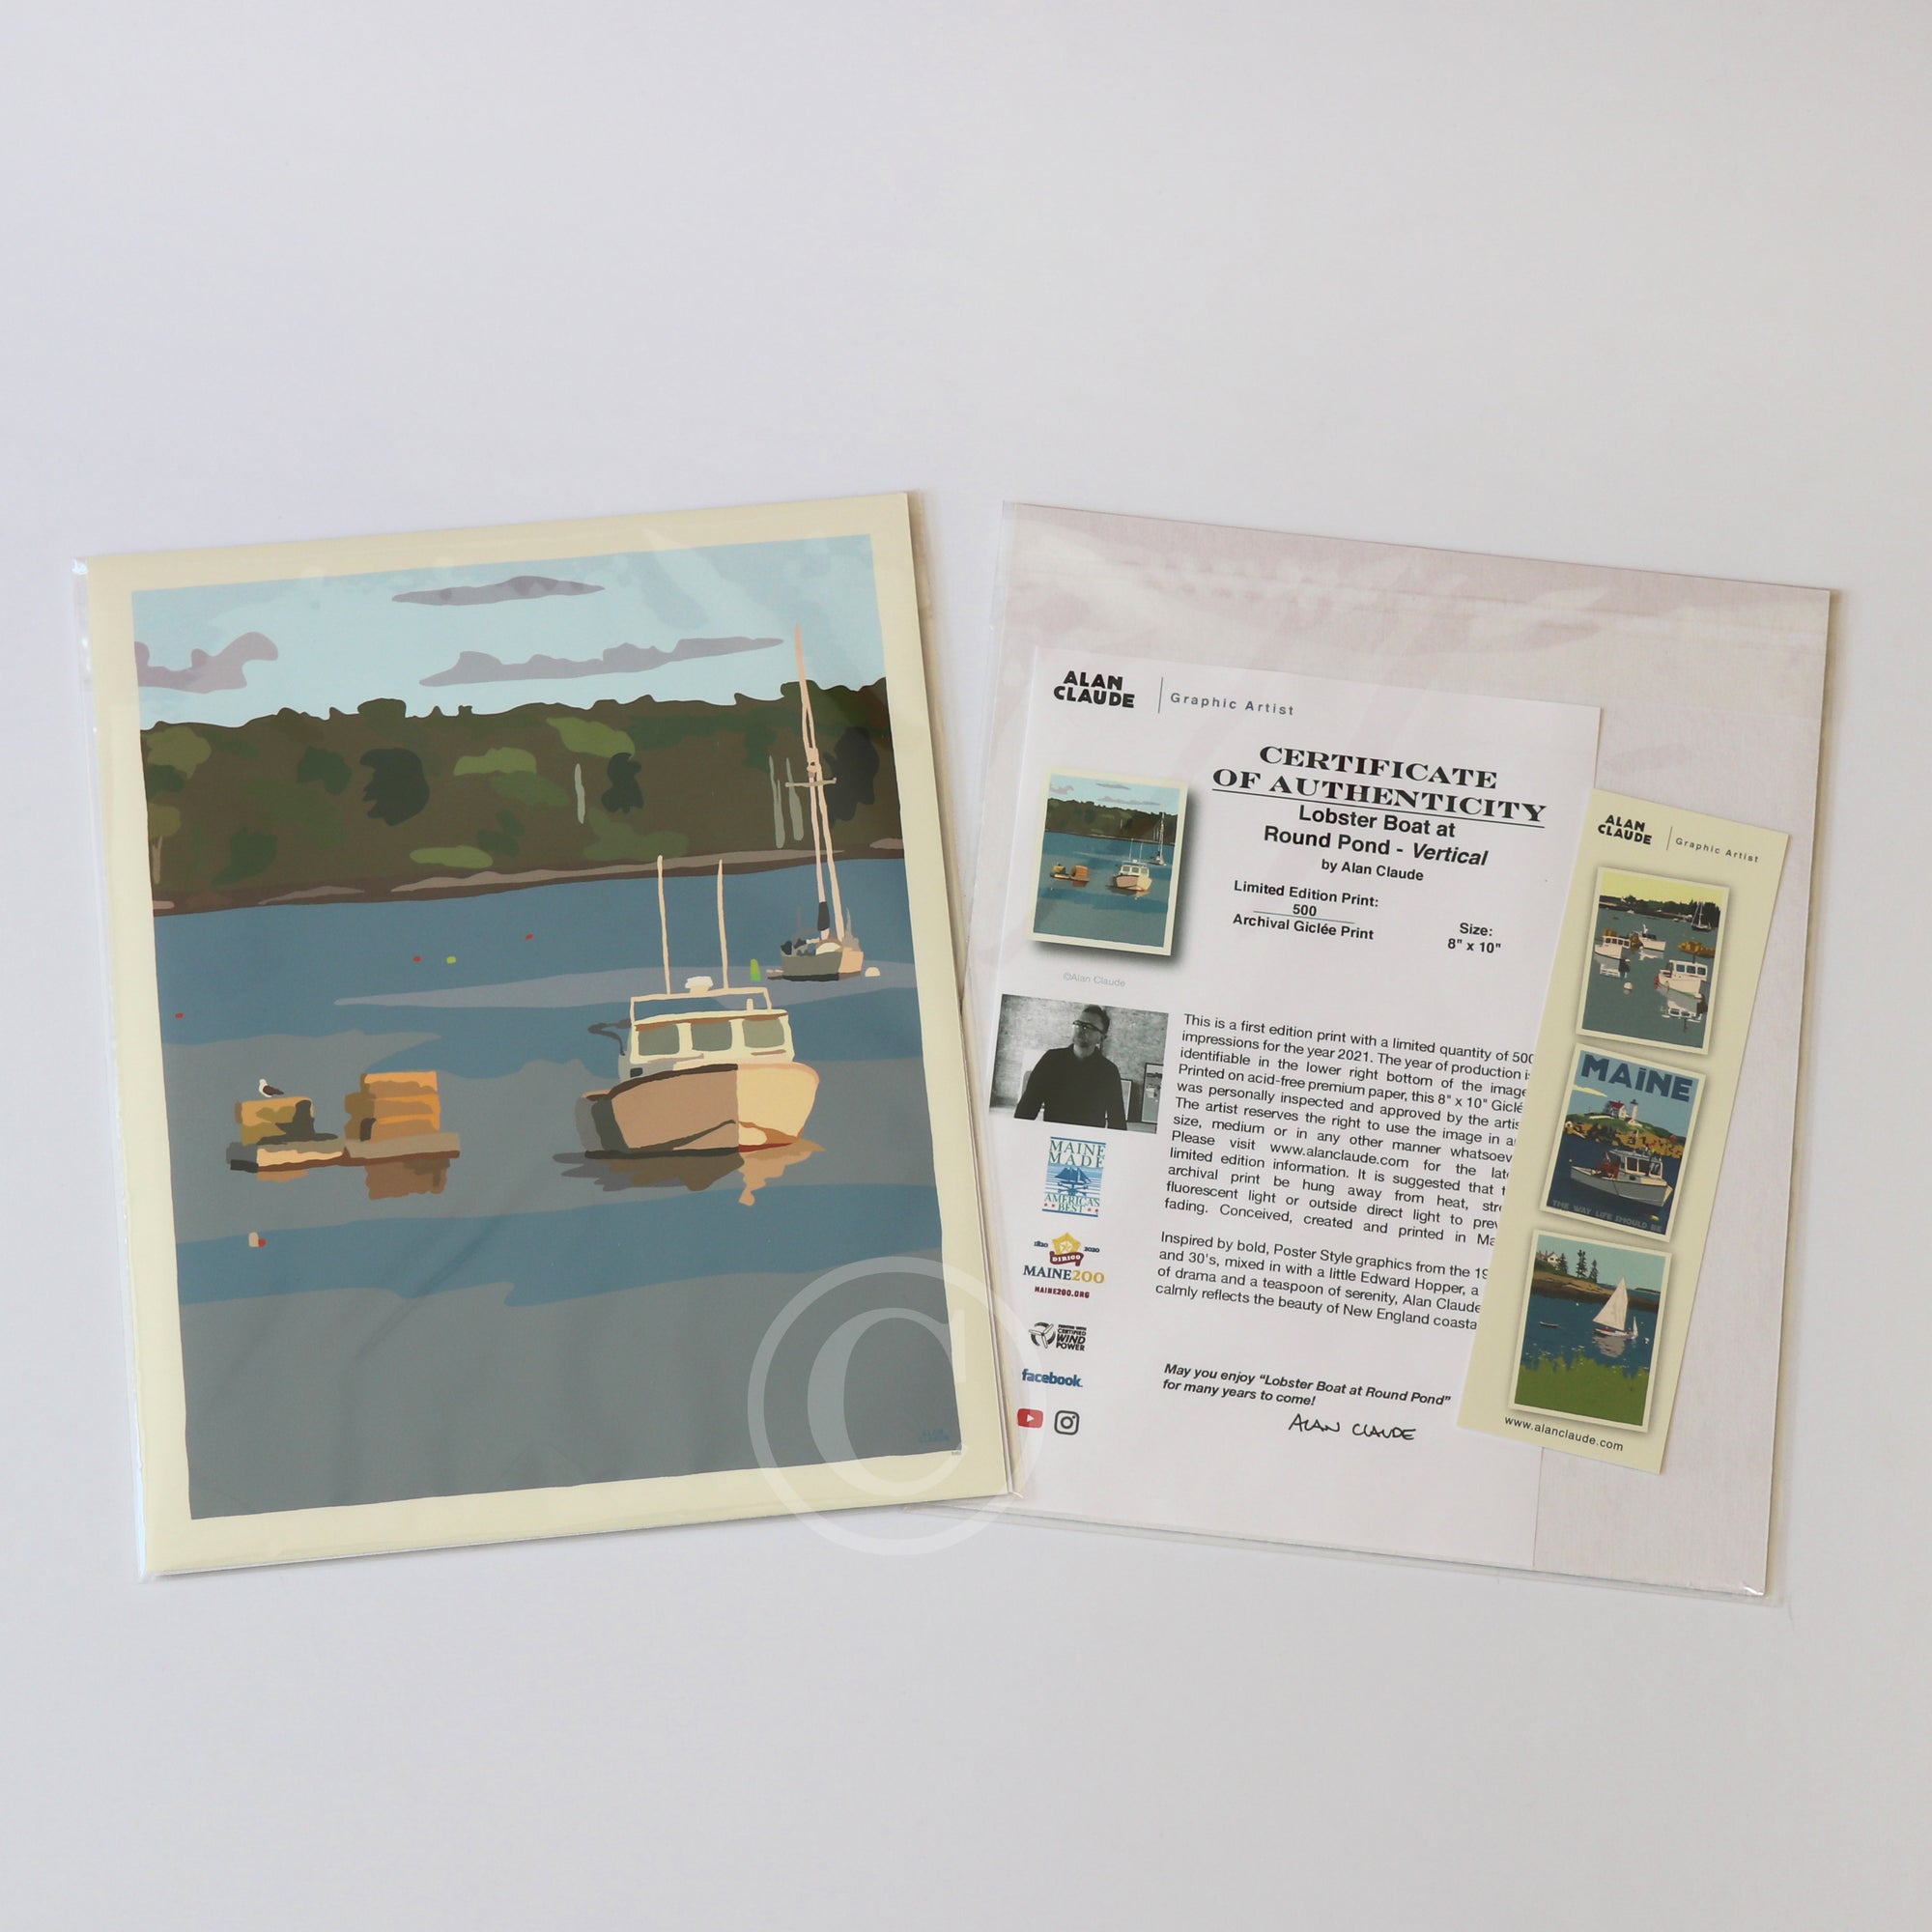 Lobster Boat in Round Pond Harbor Art Print 8" x 10” Vertical Wall Poster By Alan Claude - Maine